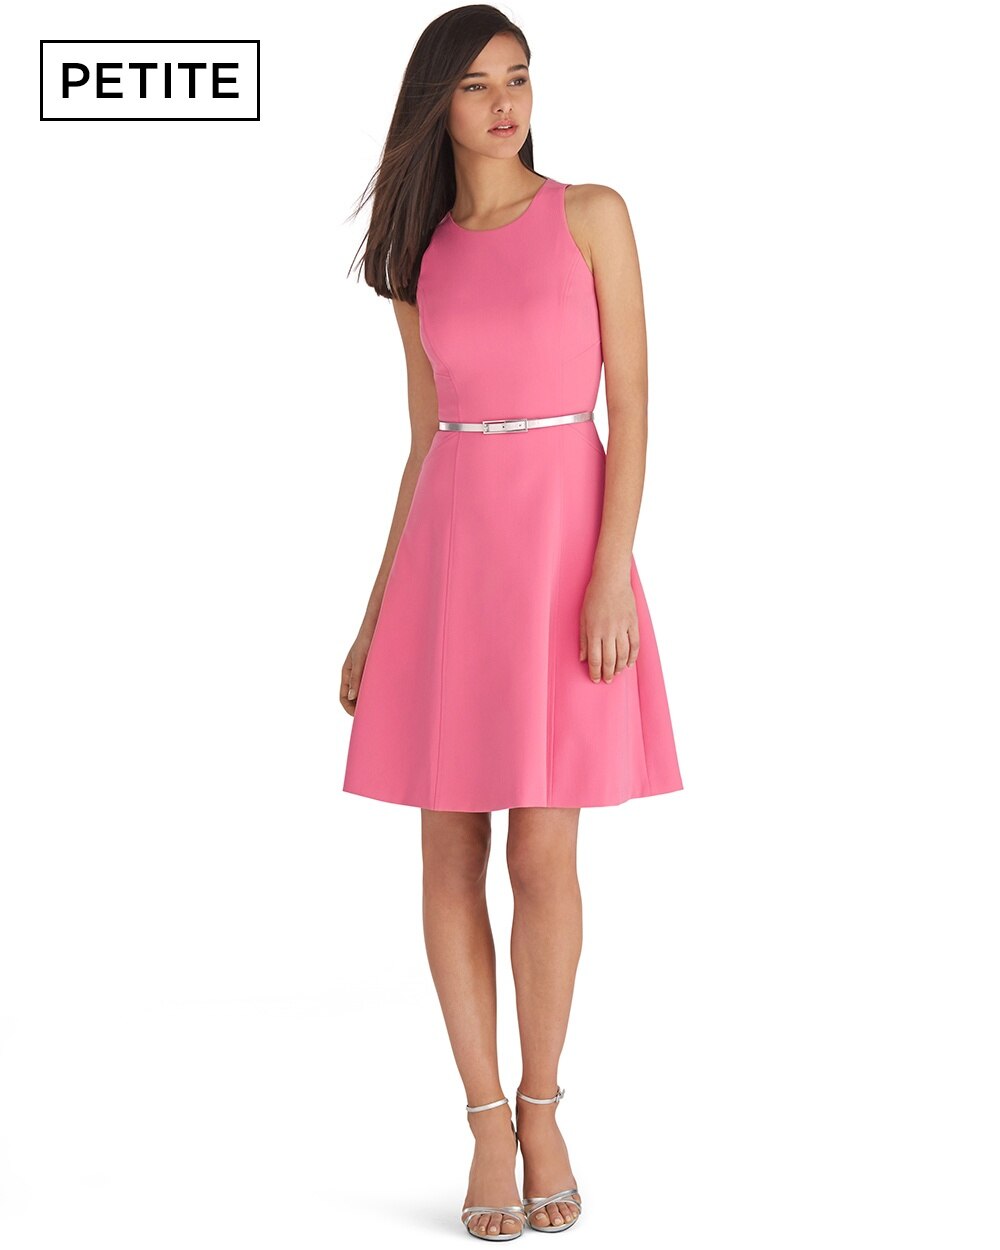 Petite Pink Dress Top Sellers, UP TO 56% OFF | www.ldeventos.com